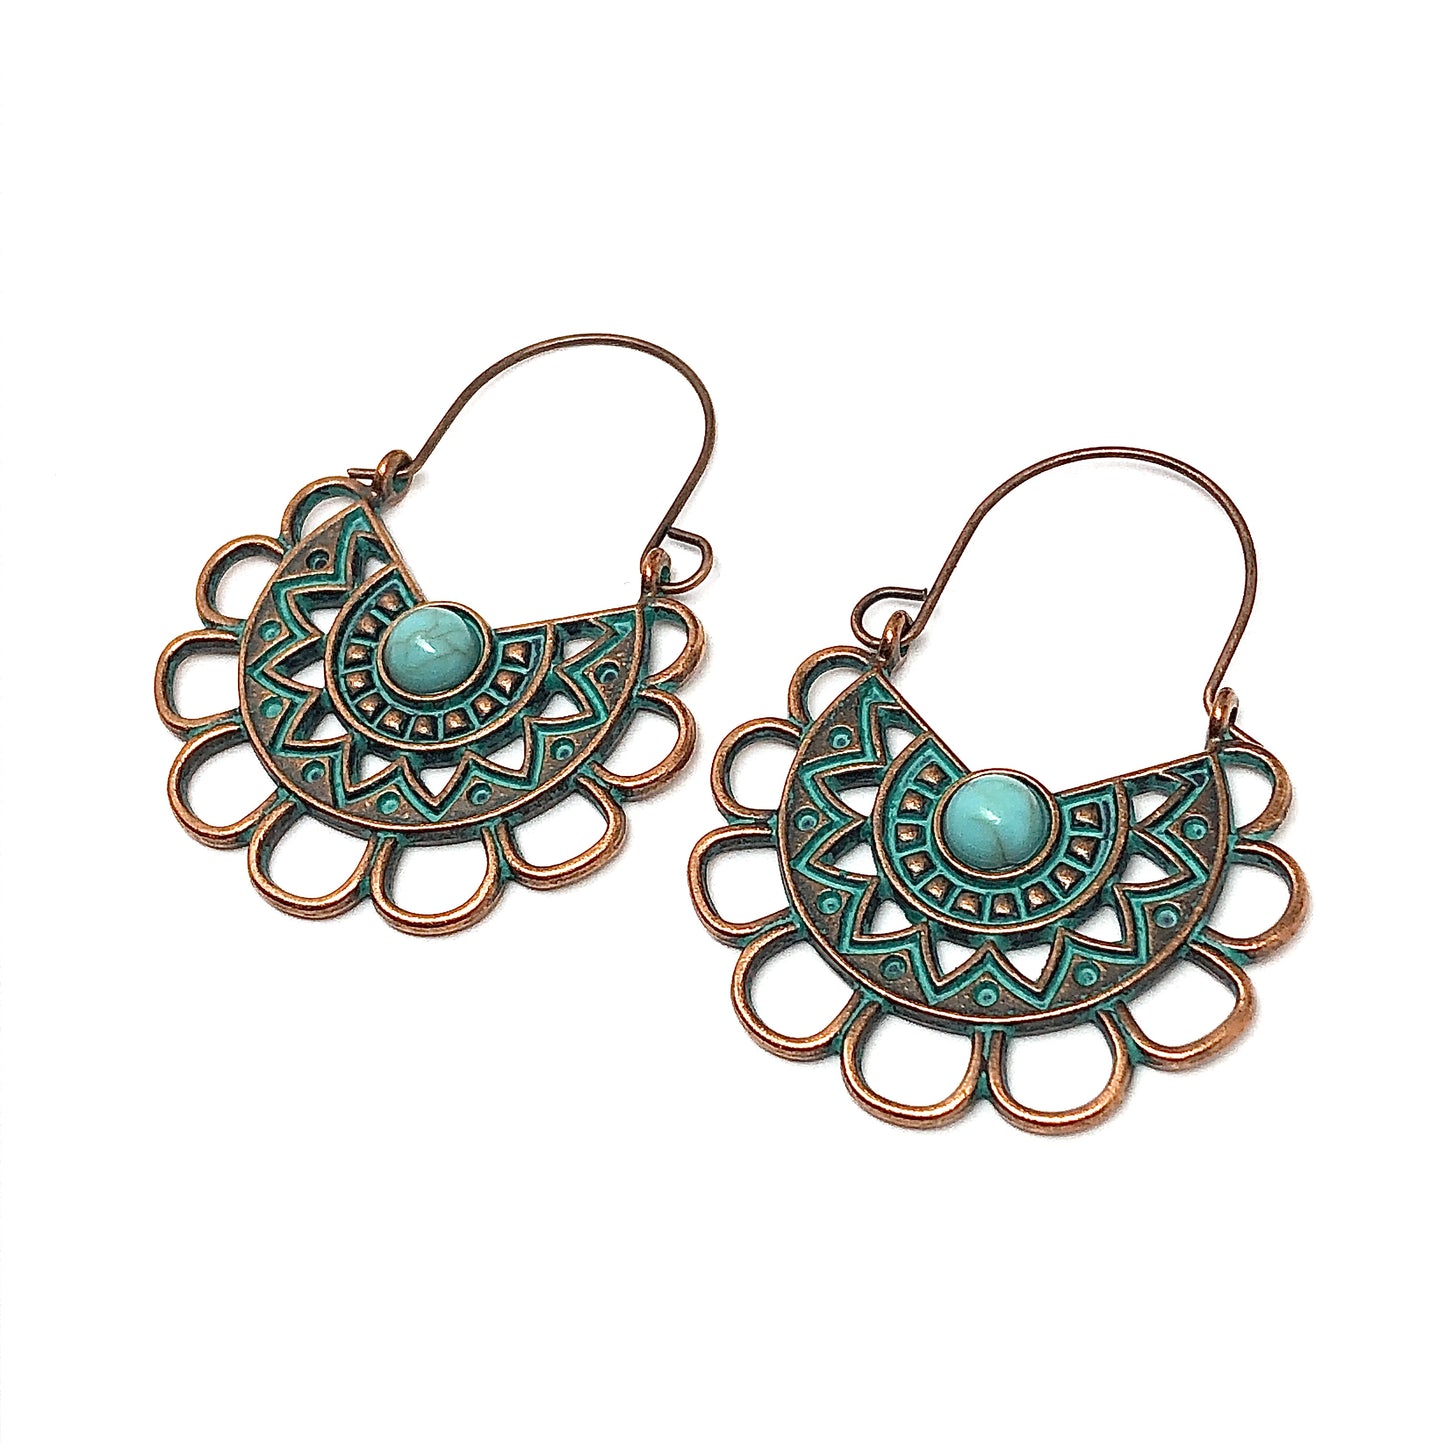 Hoop Earrings Scalloped Side Profile in Rustic Copper Turquoise Verdigris | Shop Jewelry - USA Local Small Business